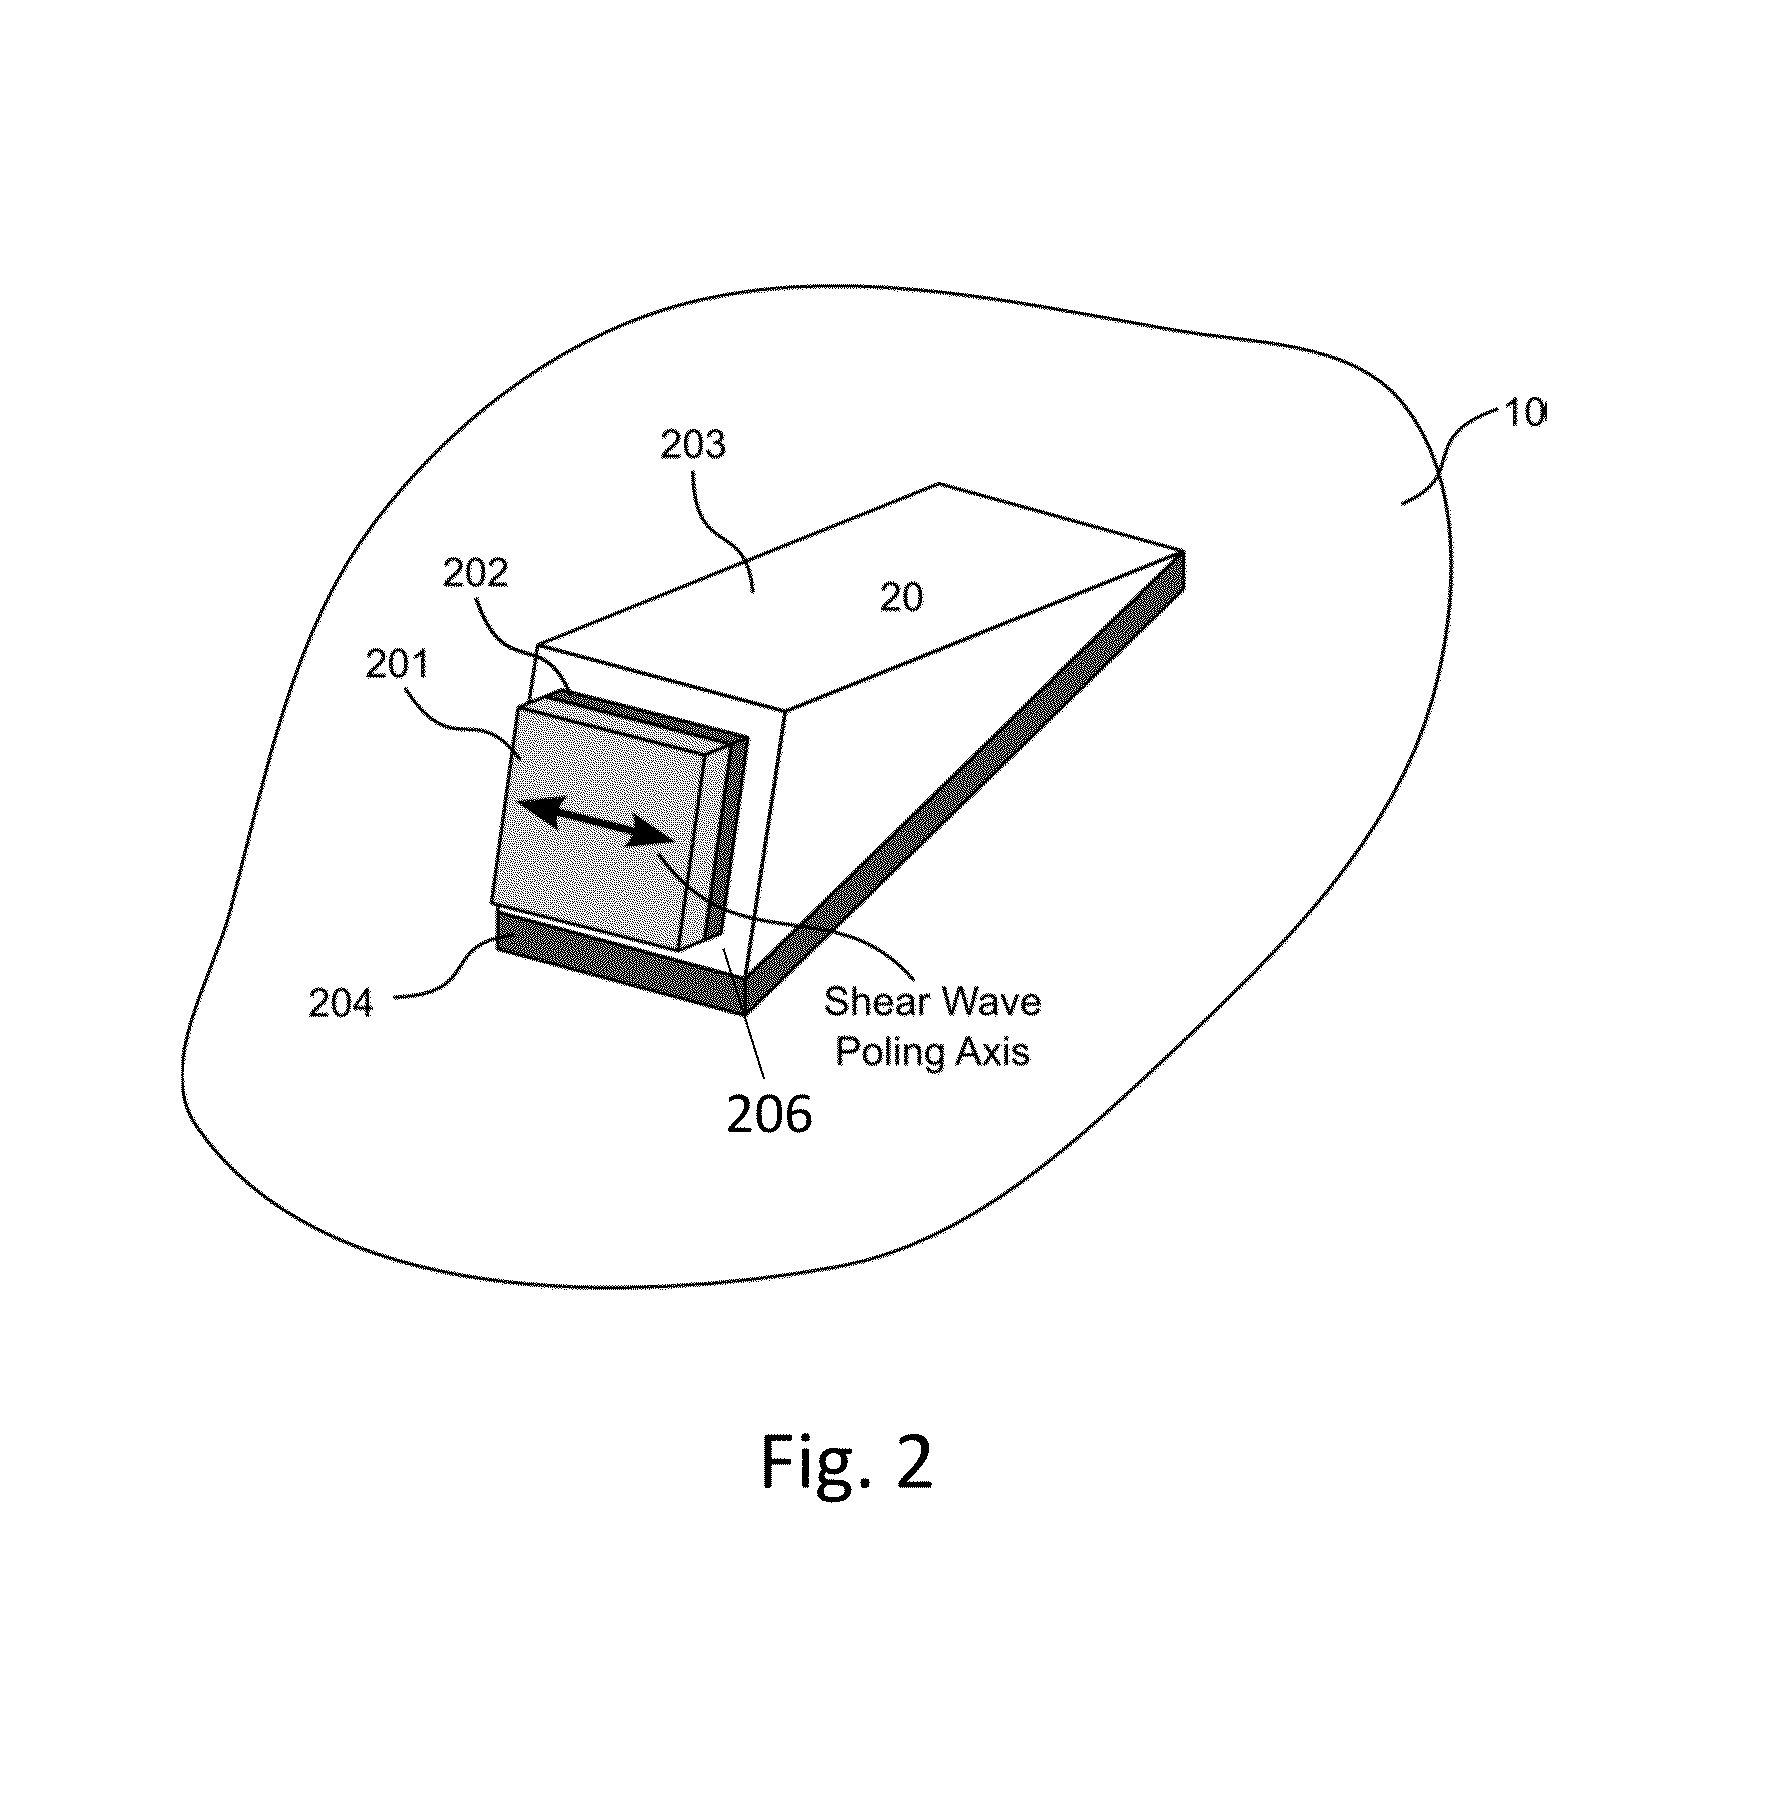 Method and apparatus for acoustic downhole telemetry and power delivery system using transverse or torsional waves